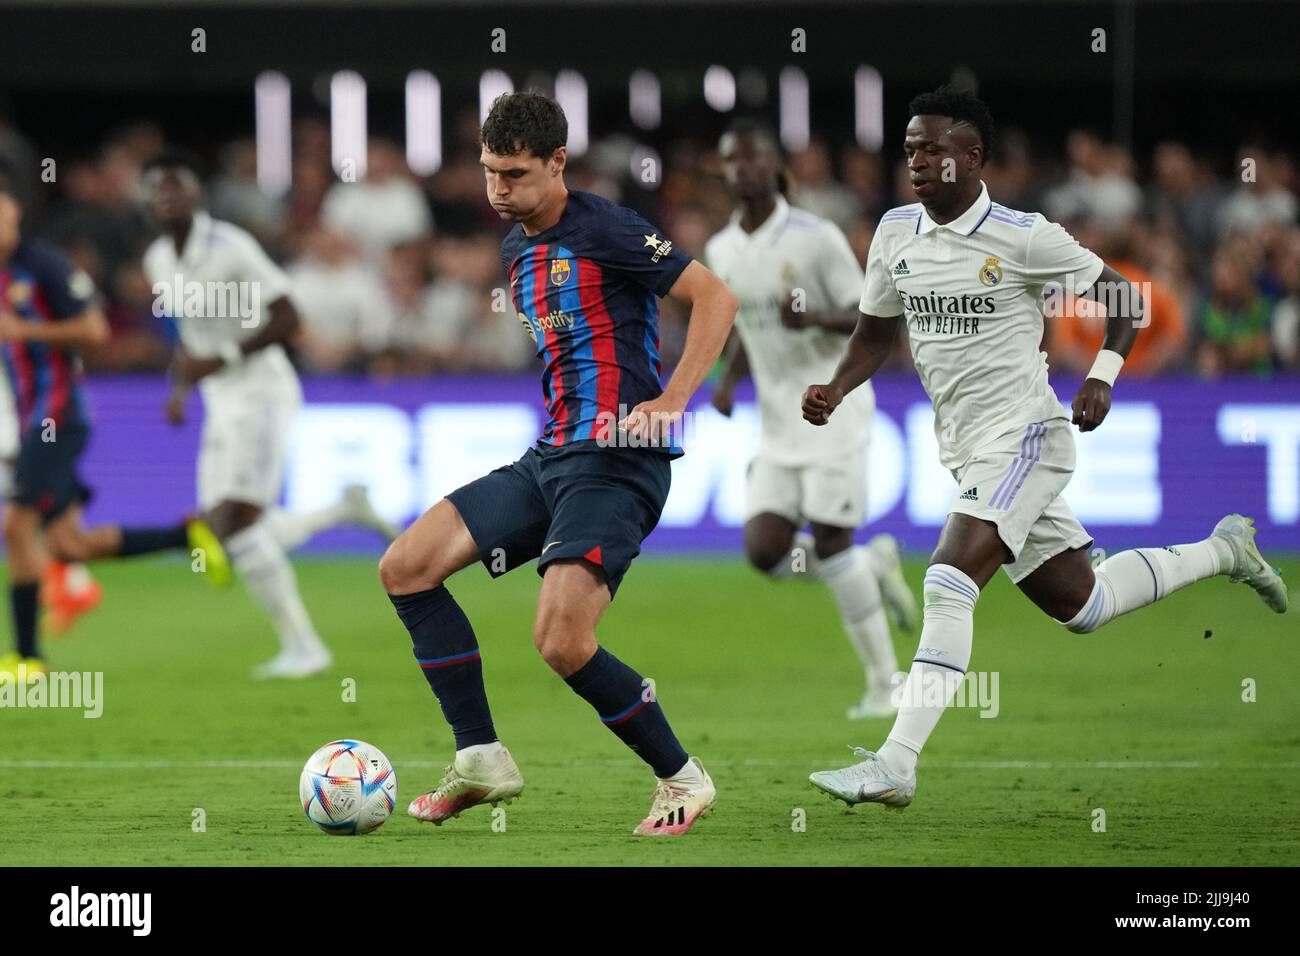 LAS VEGAS, NV - JULY 23: Alejandro Balde of F.C Barcelona passes the ball during Soccer Champions Tour match between Real Madrid and F.C Barcelona at Las Vegas,NV on July 23, 2022 in Las Vegas, USA. (Photo by Louis Grasse/PxImages) Stock Photo